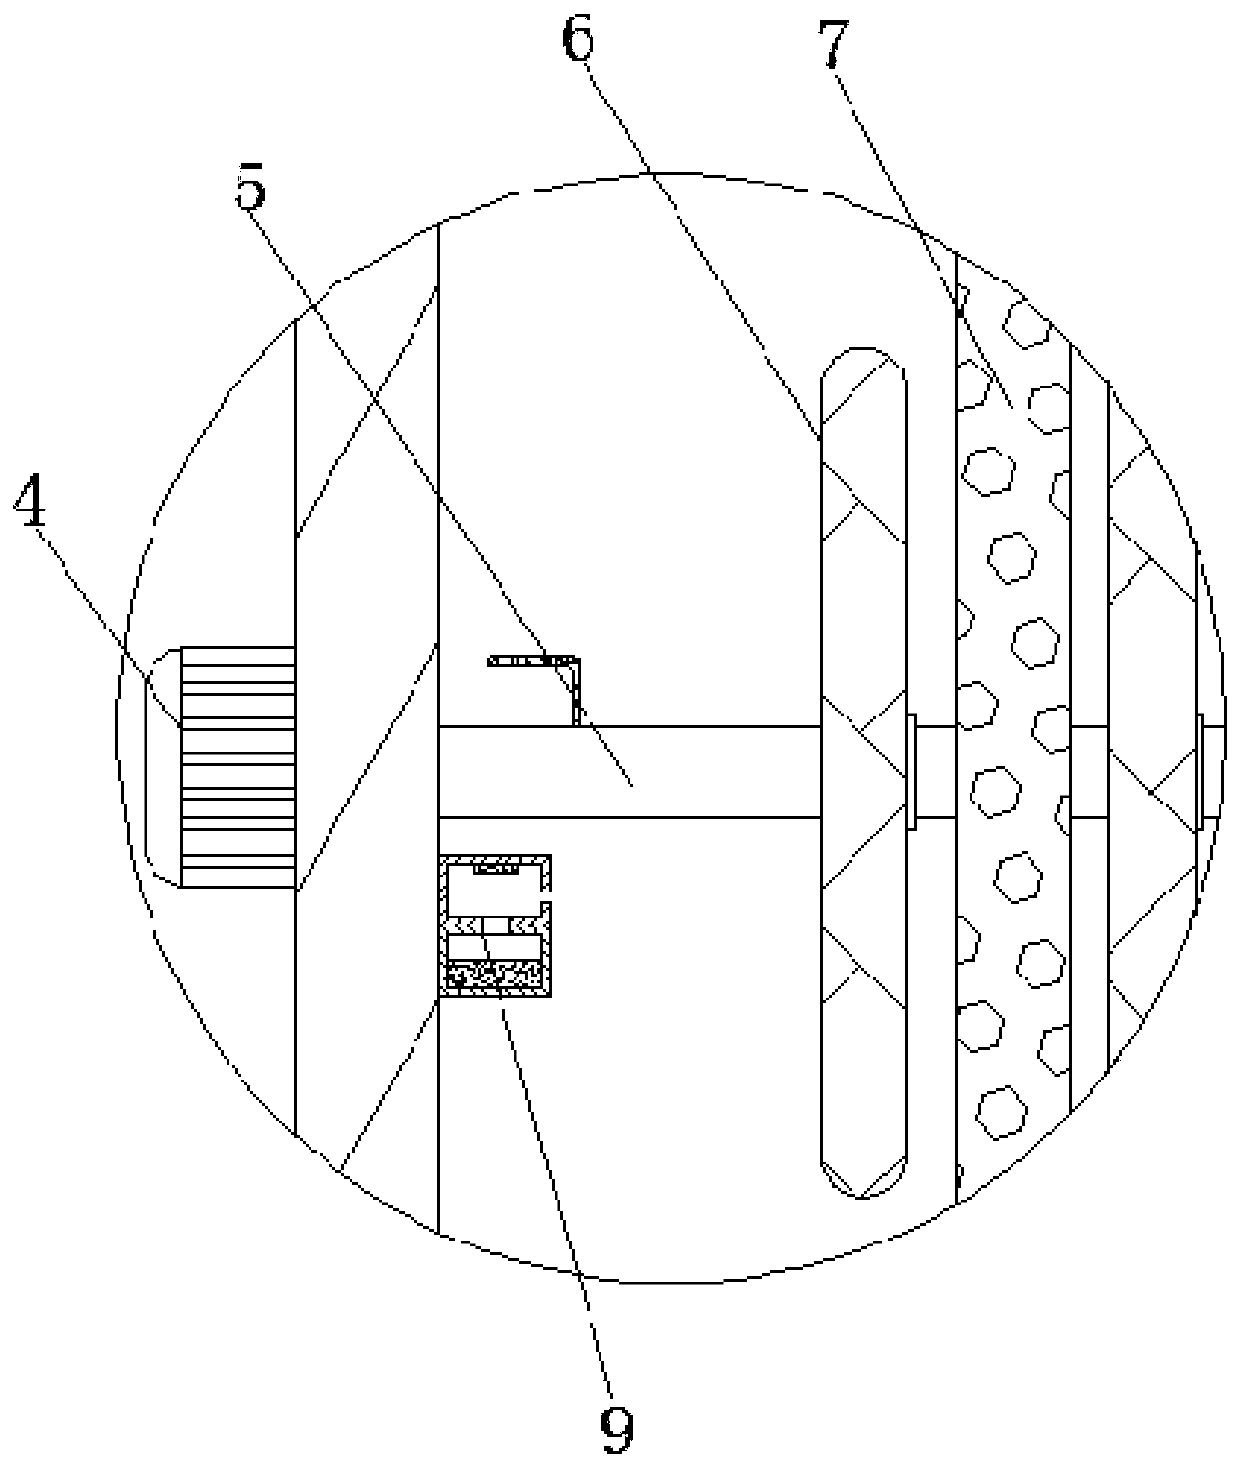 Paperboard recycling and cutting device based on light sensation control principle